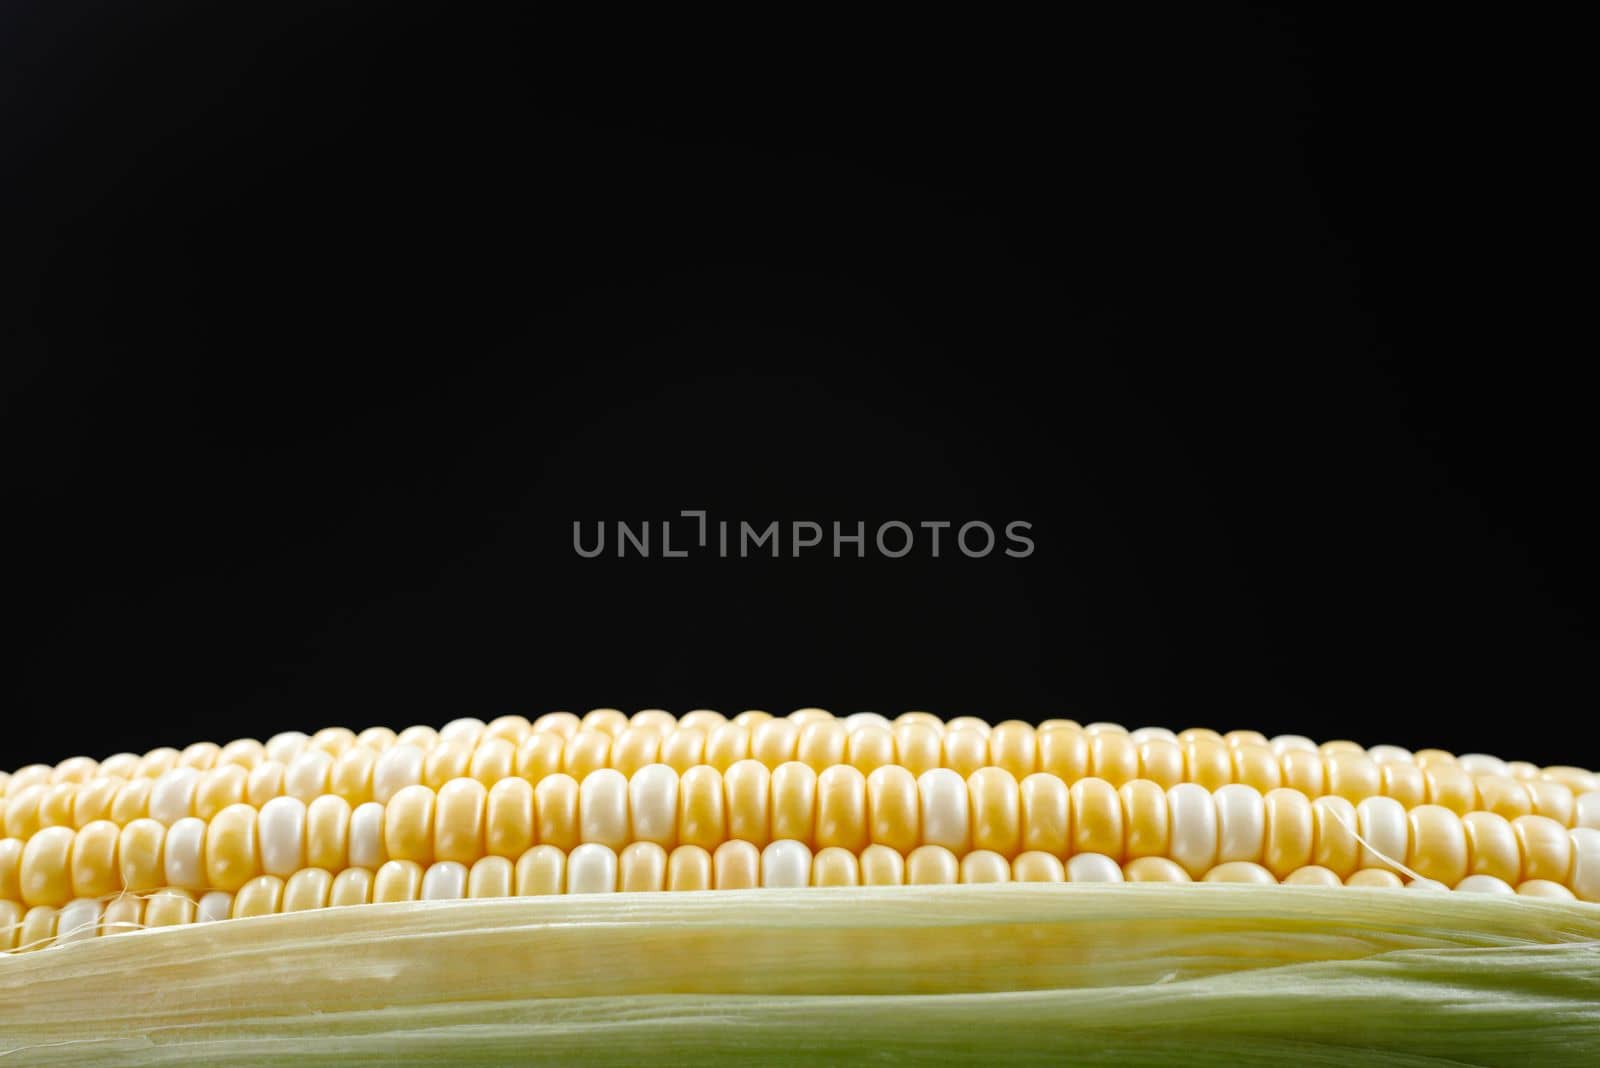 Raw corn in close-up. Corn kernel on black background. View from an angle.